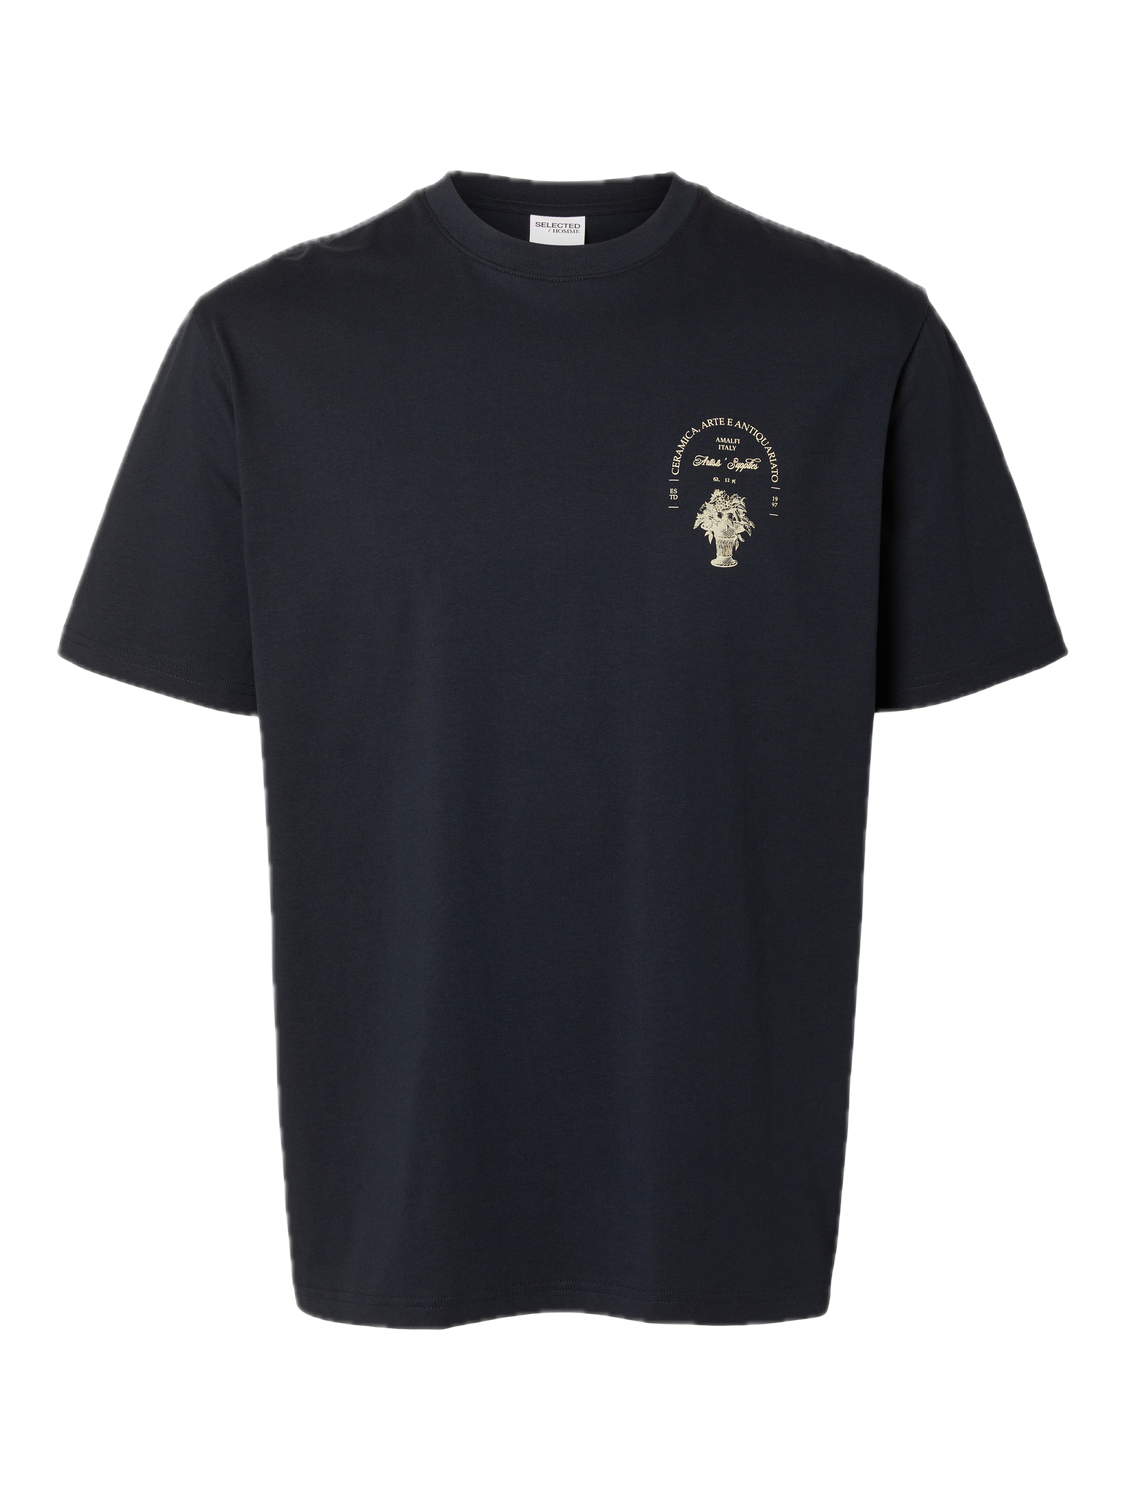 Camiseta Selected Relaxaries Sky Captain